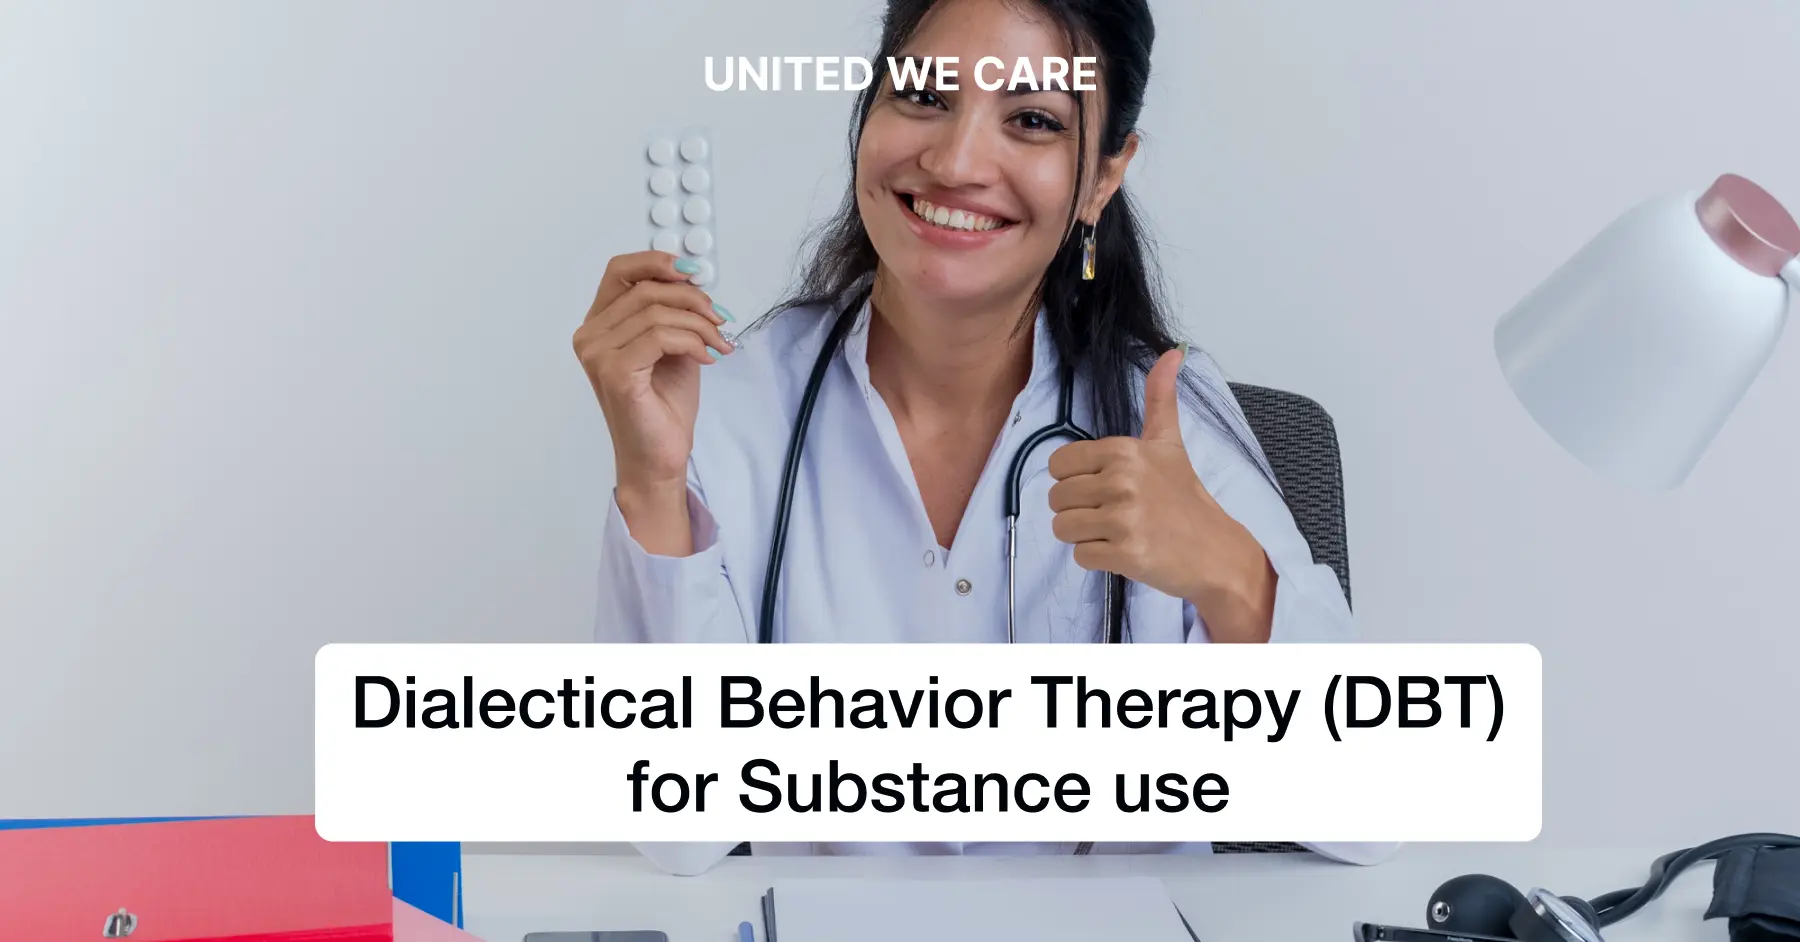 DBT for Substance Use: 6 Surprising Benefits of DBT for Substance Use